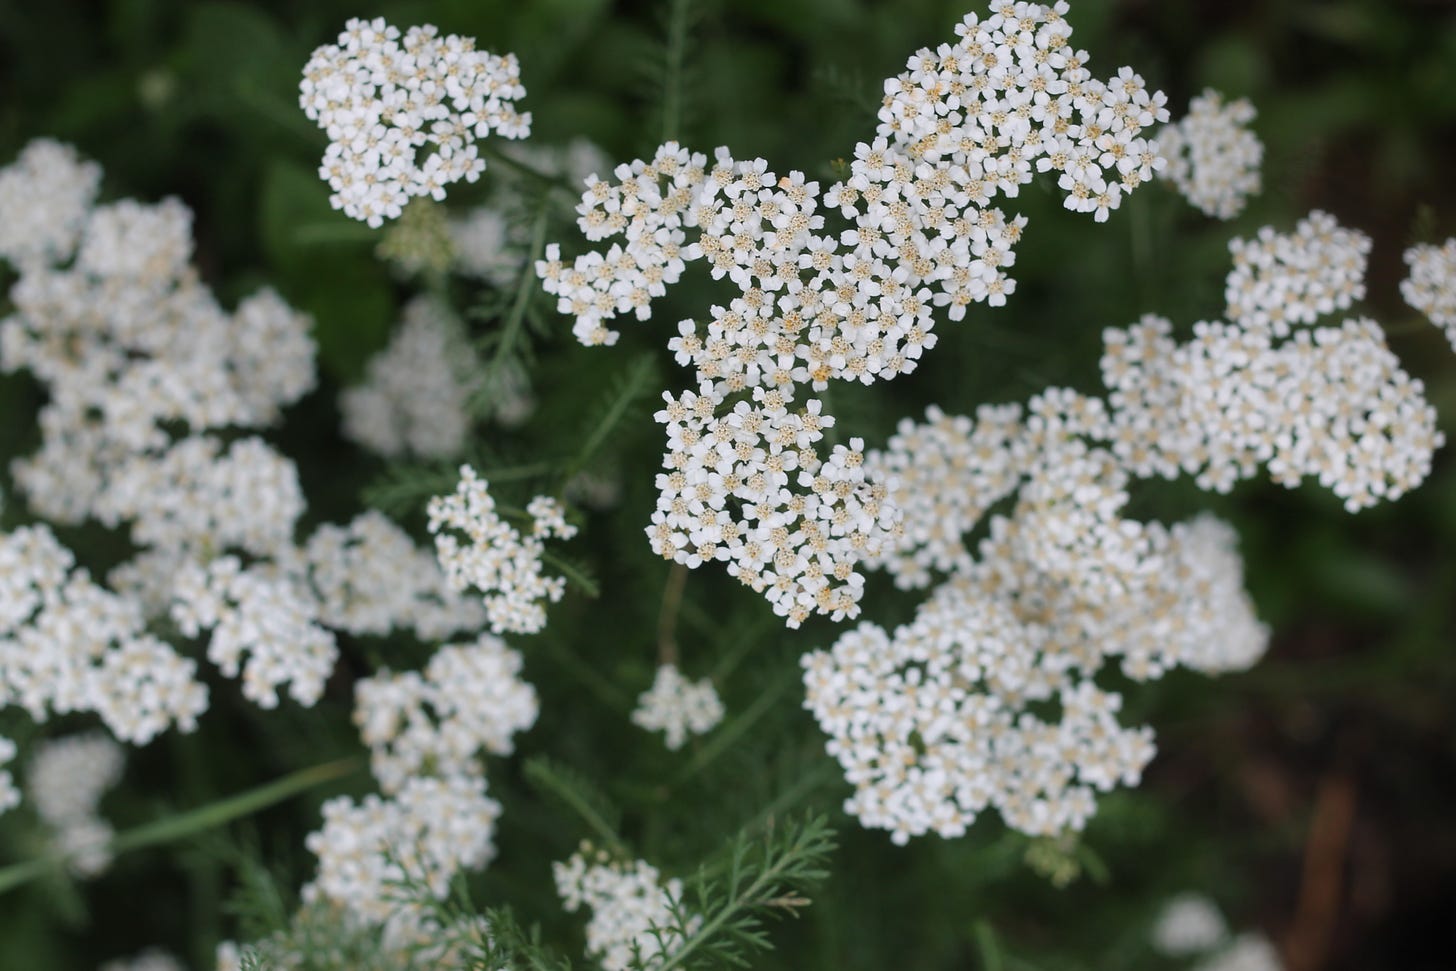 Clusters of tiny white blooms with off-white centres and long, feathery green leaves. 